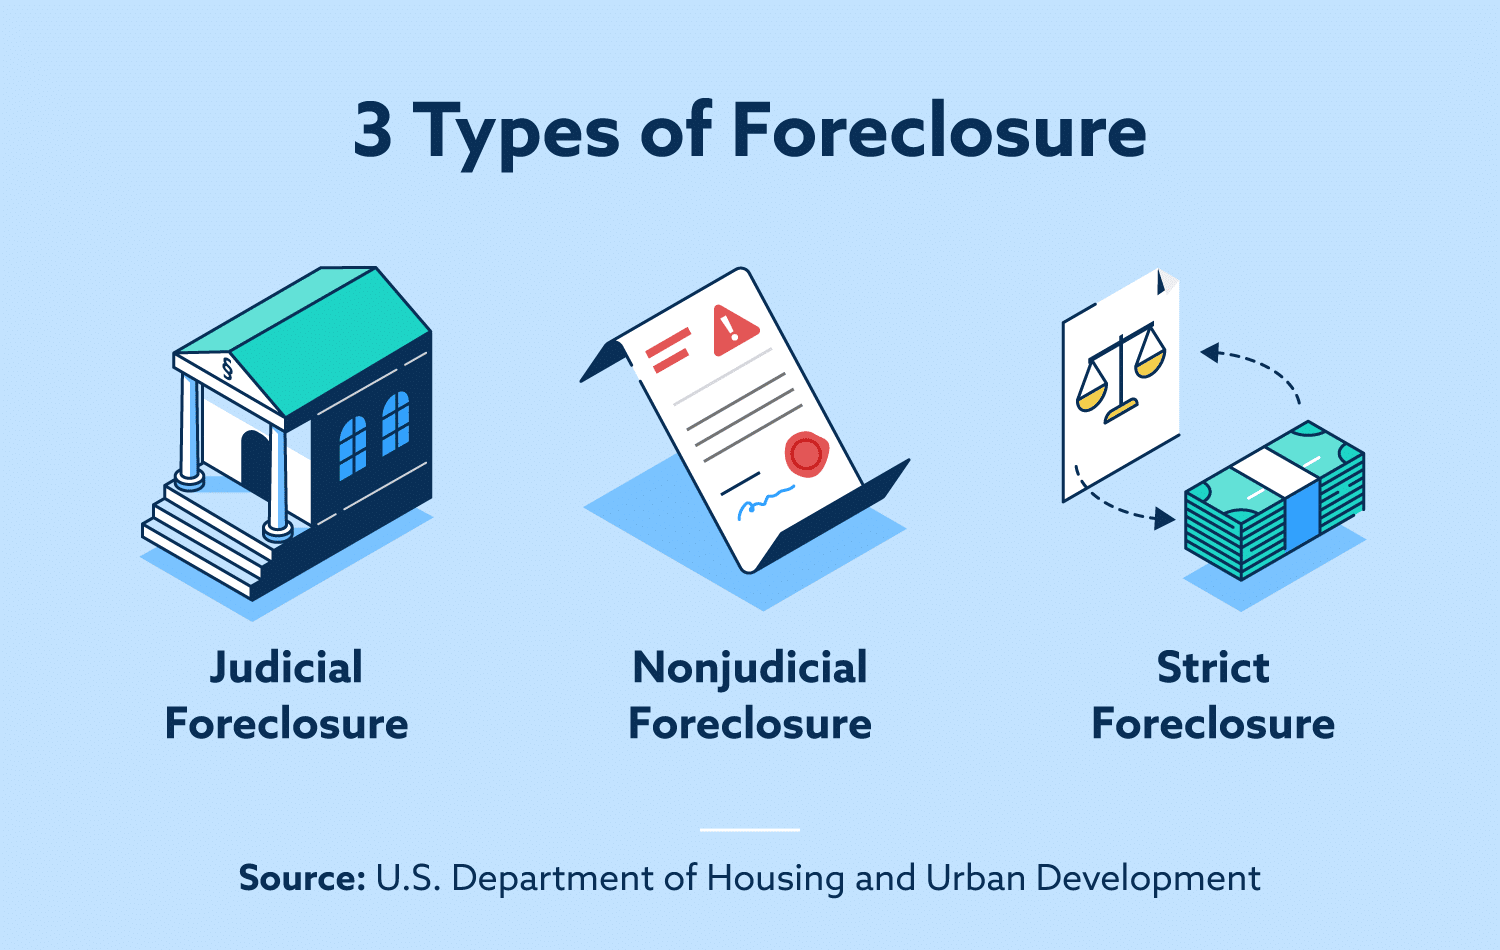 Different Types of Foreclosure Explained